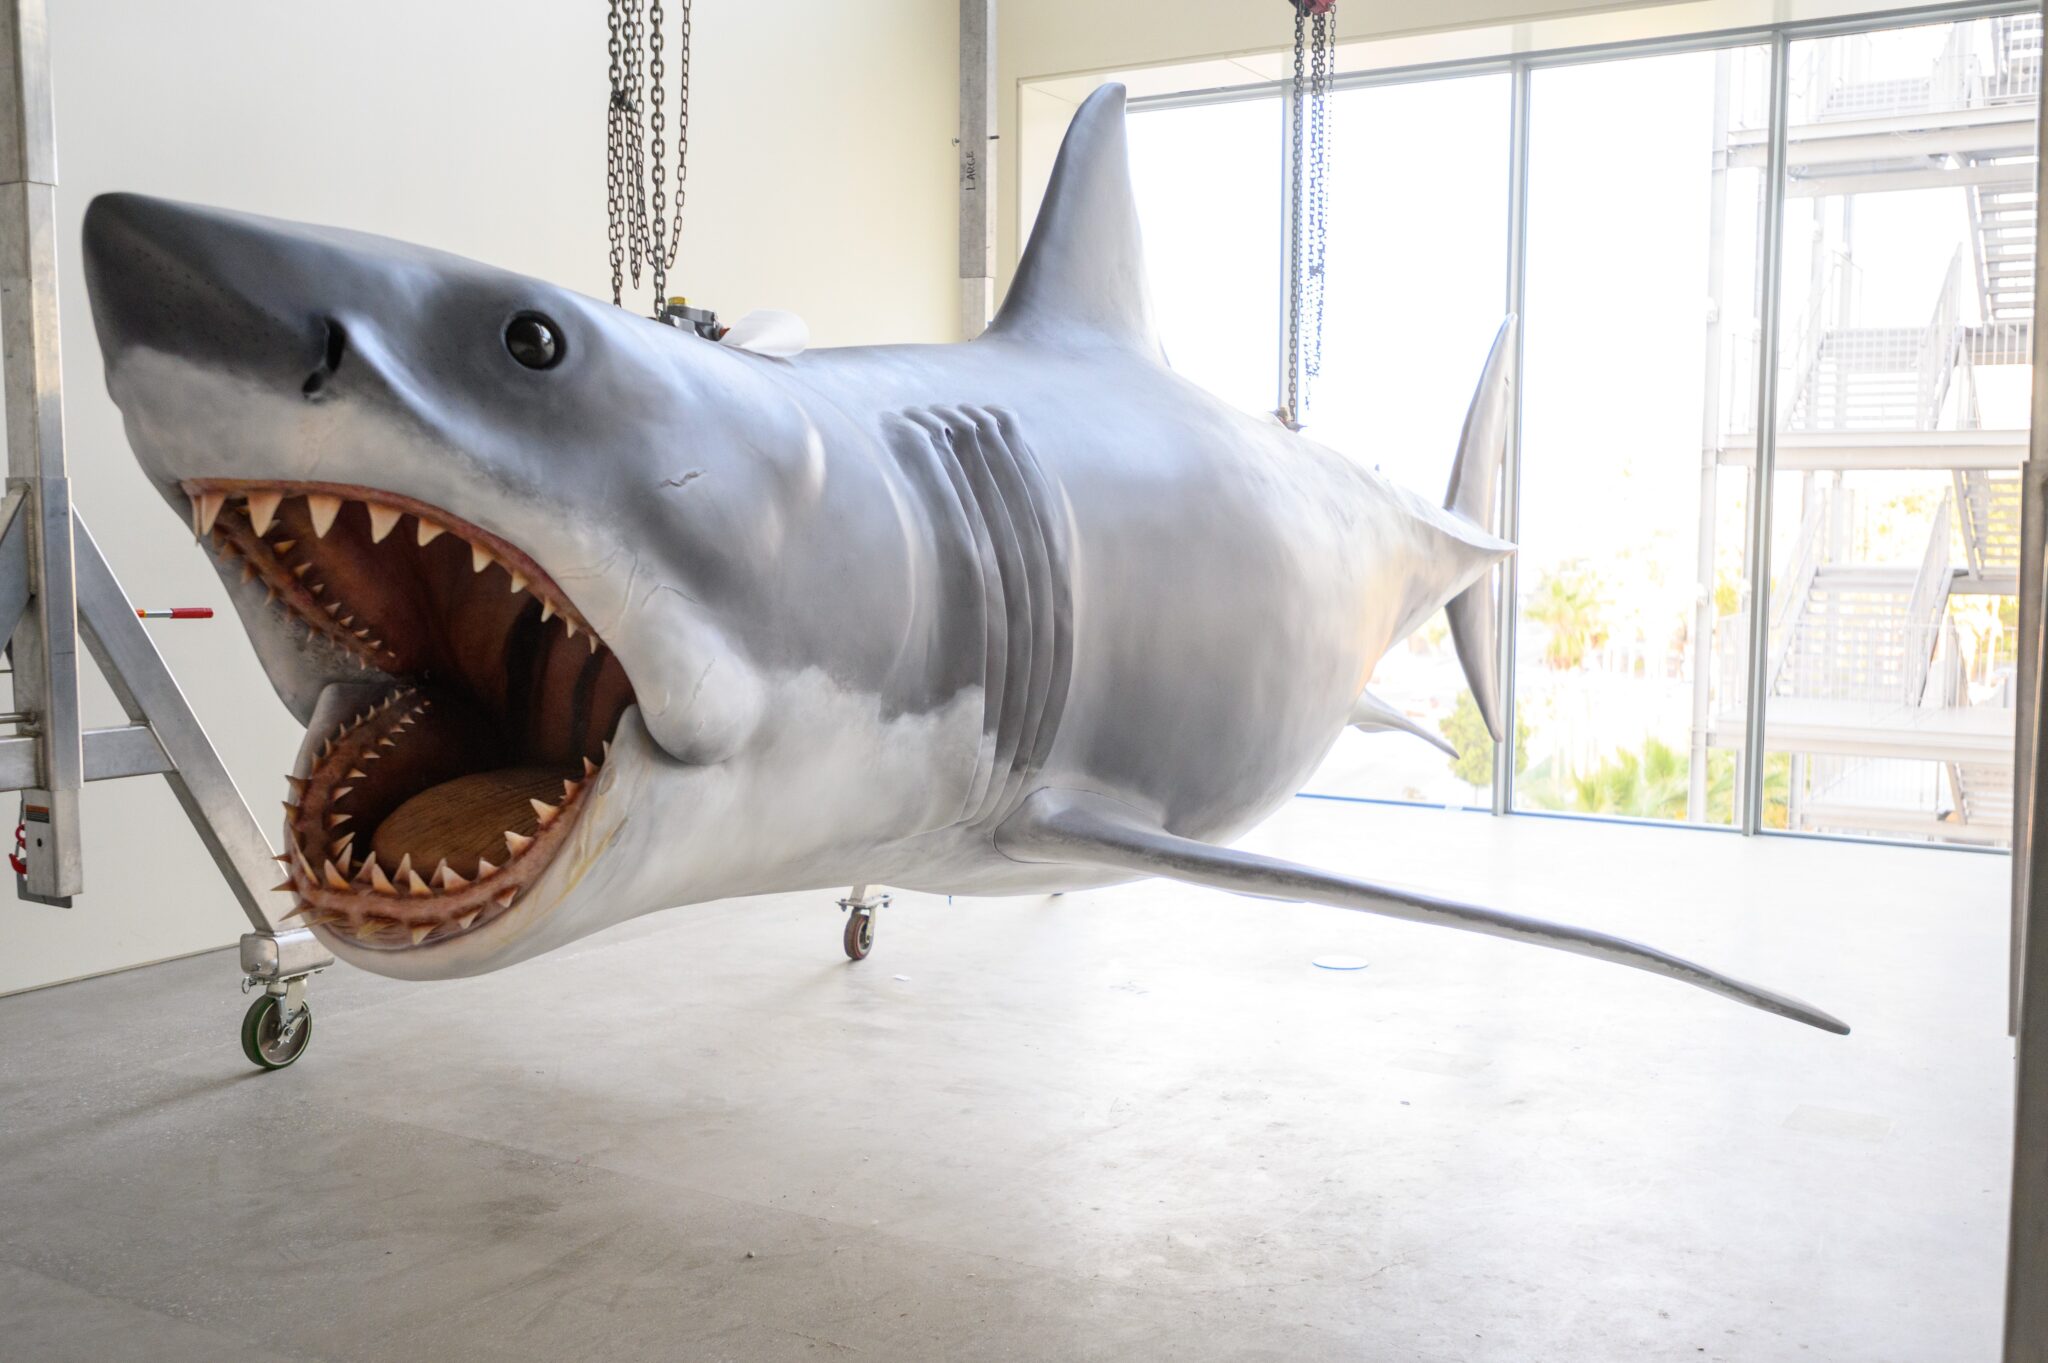 Academy Museum of Motion Pictures, Bruce the shark, Jaws